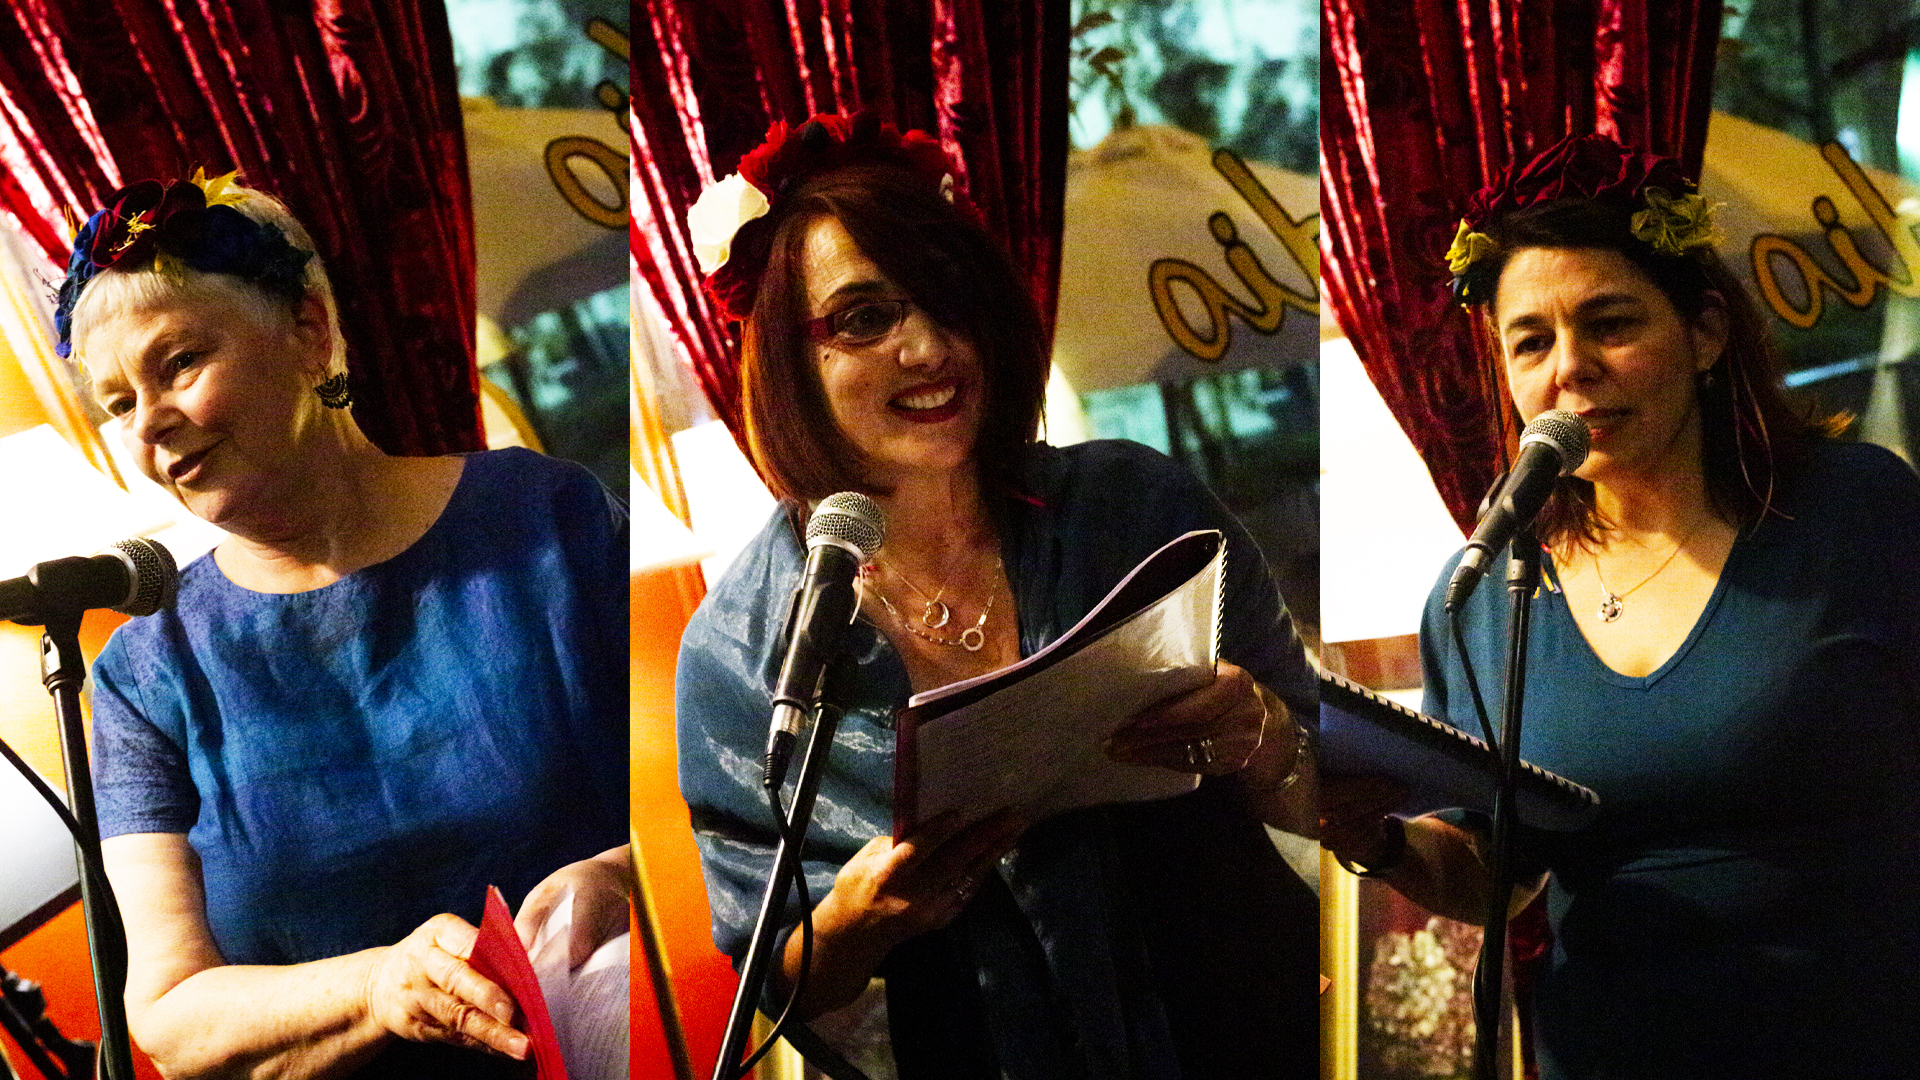 A photo montage of three adult women, standing behind microphones in mid-address. They are situated in a cafe, with the words "Open Studio" visible on the window behind.